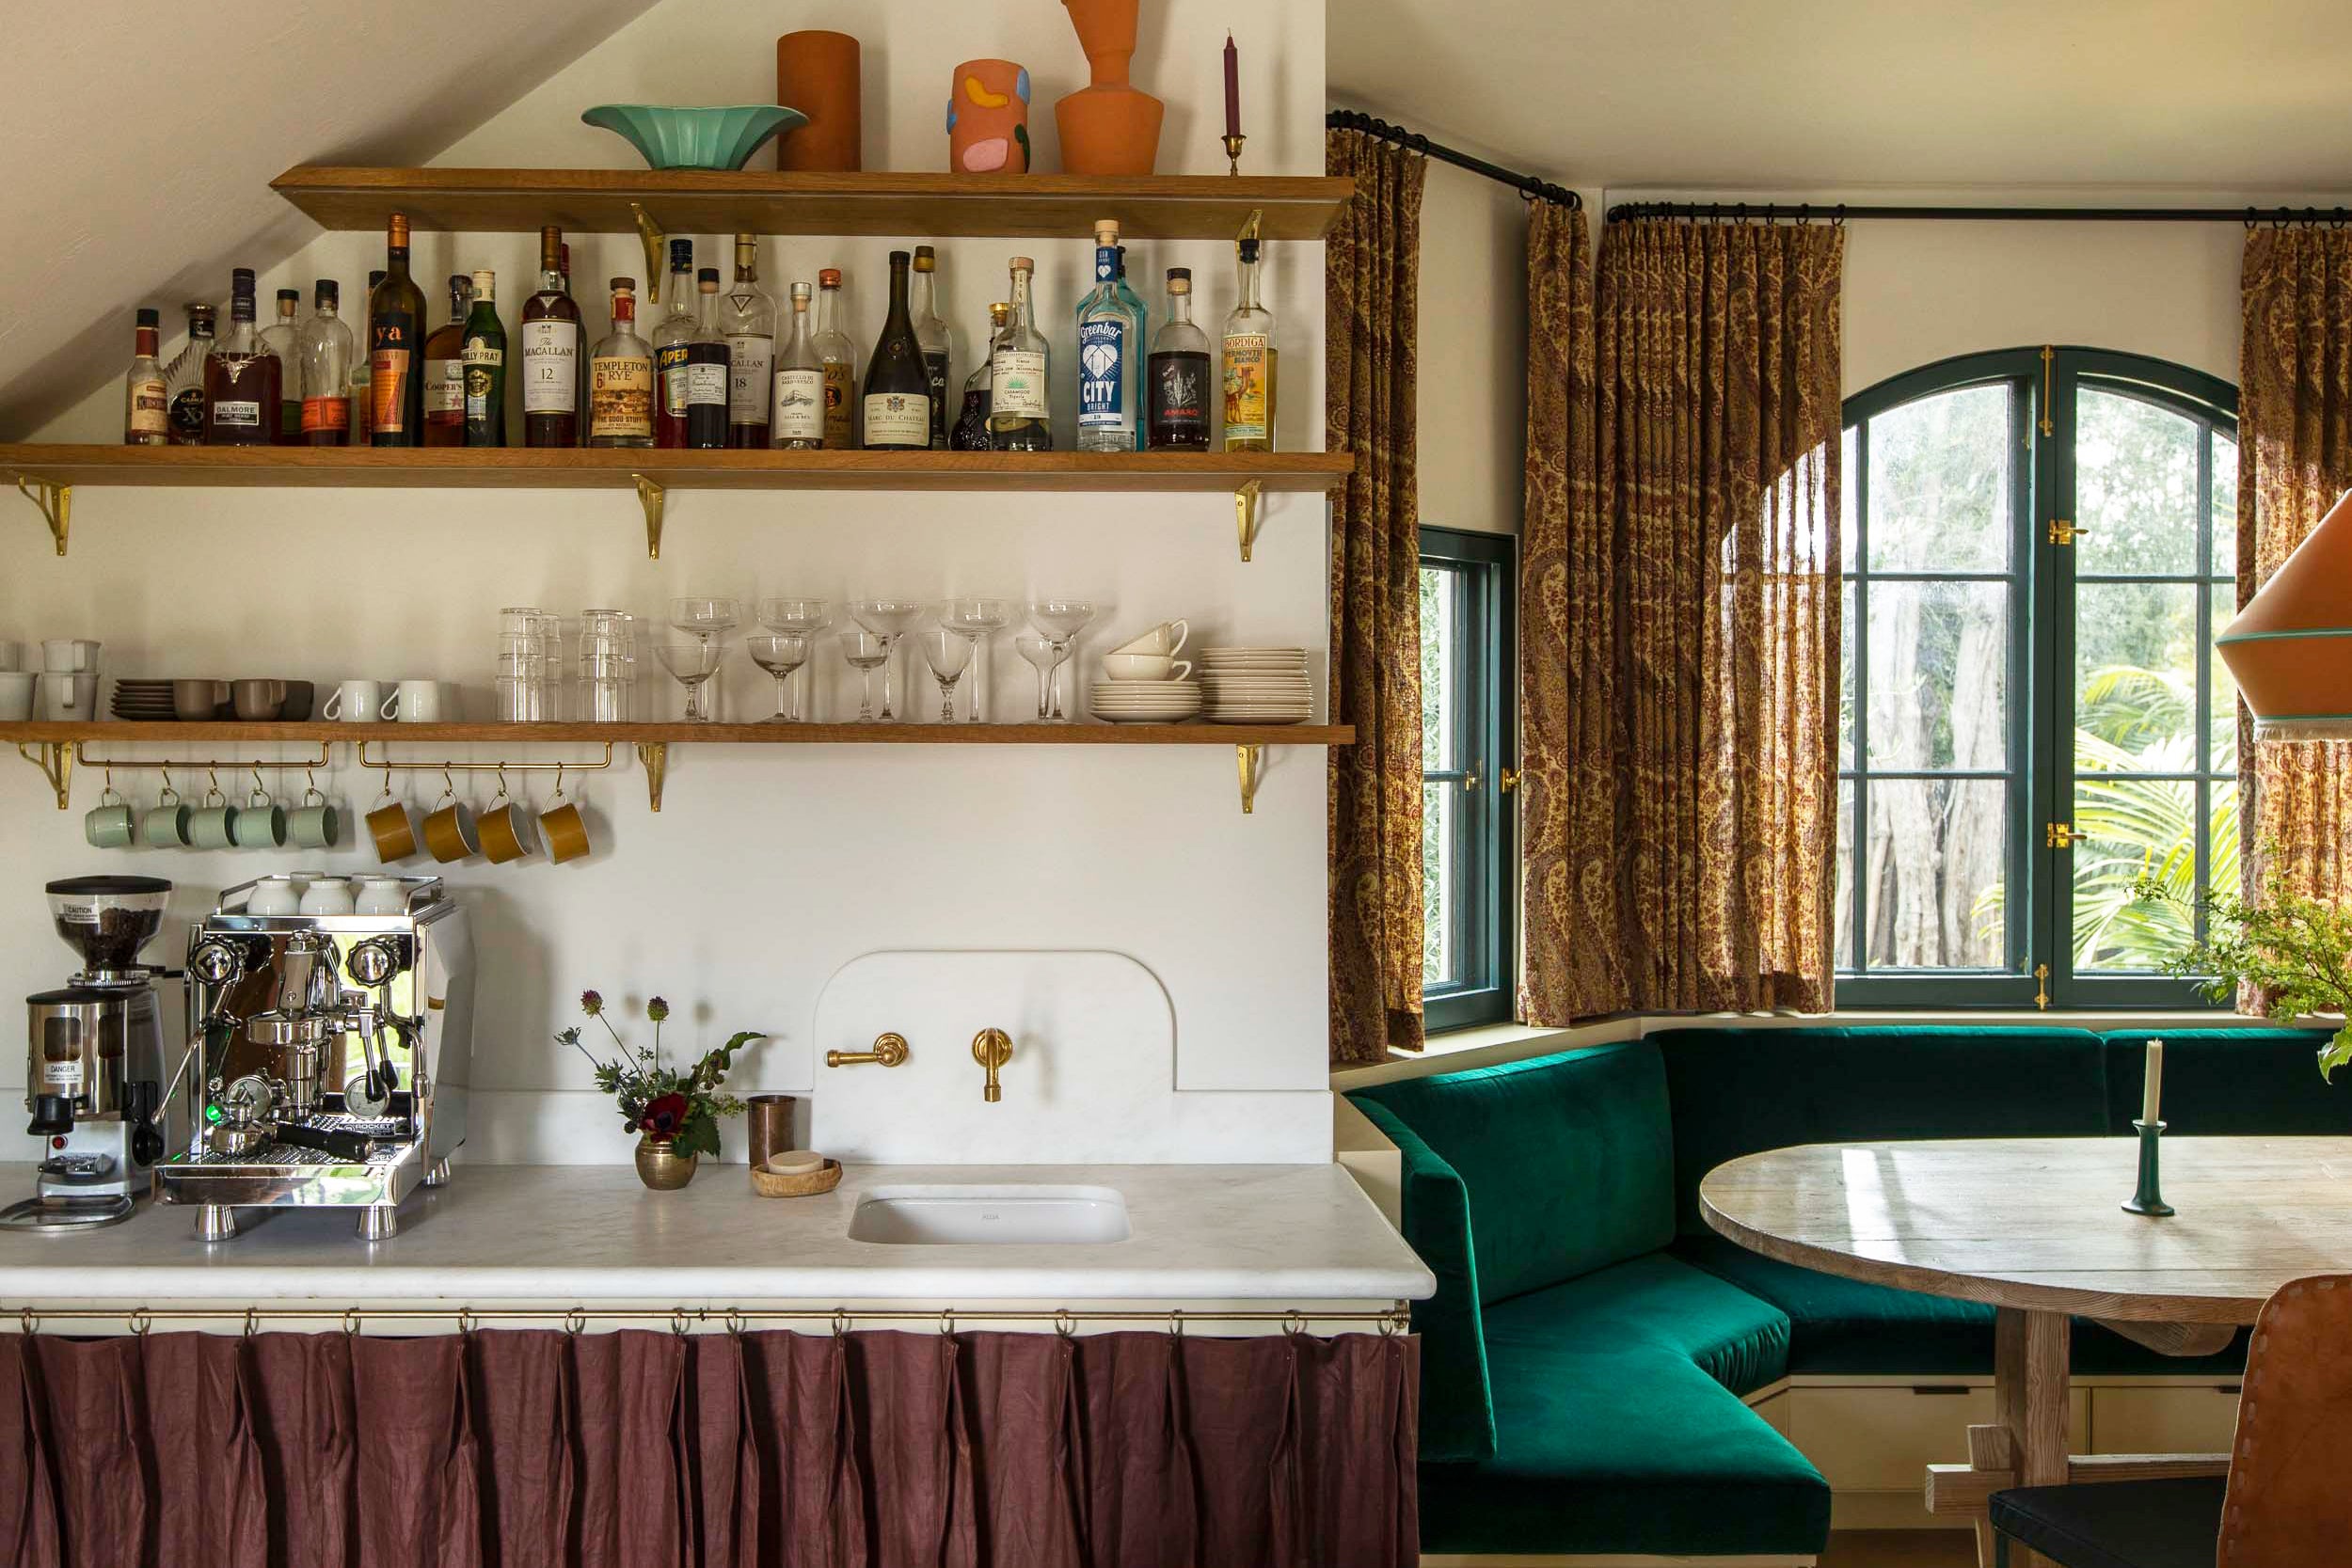 Kitchen with plum sink skirt and green velvet banquette